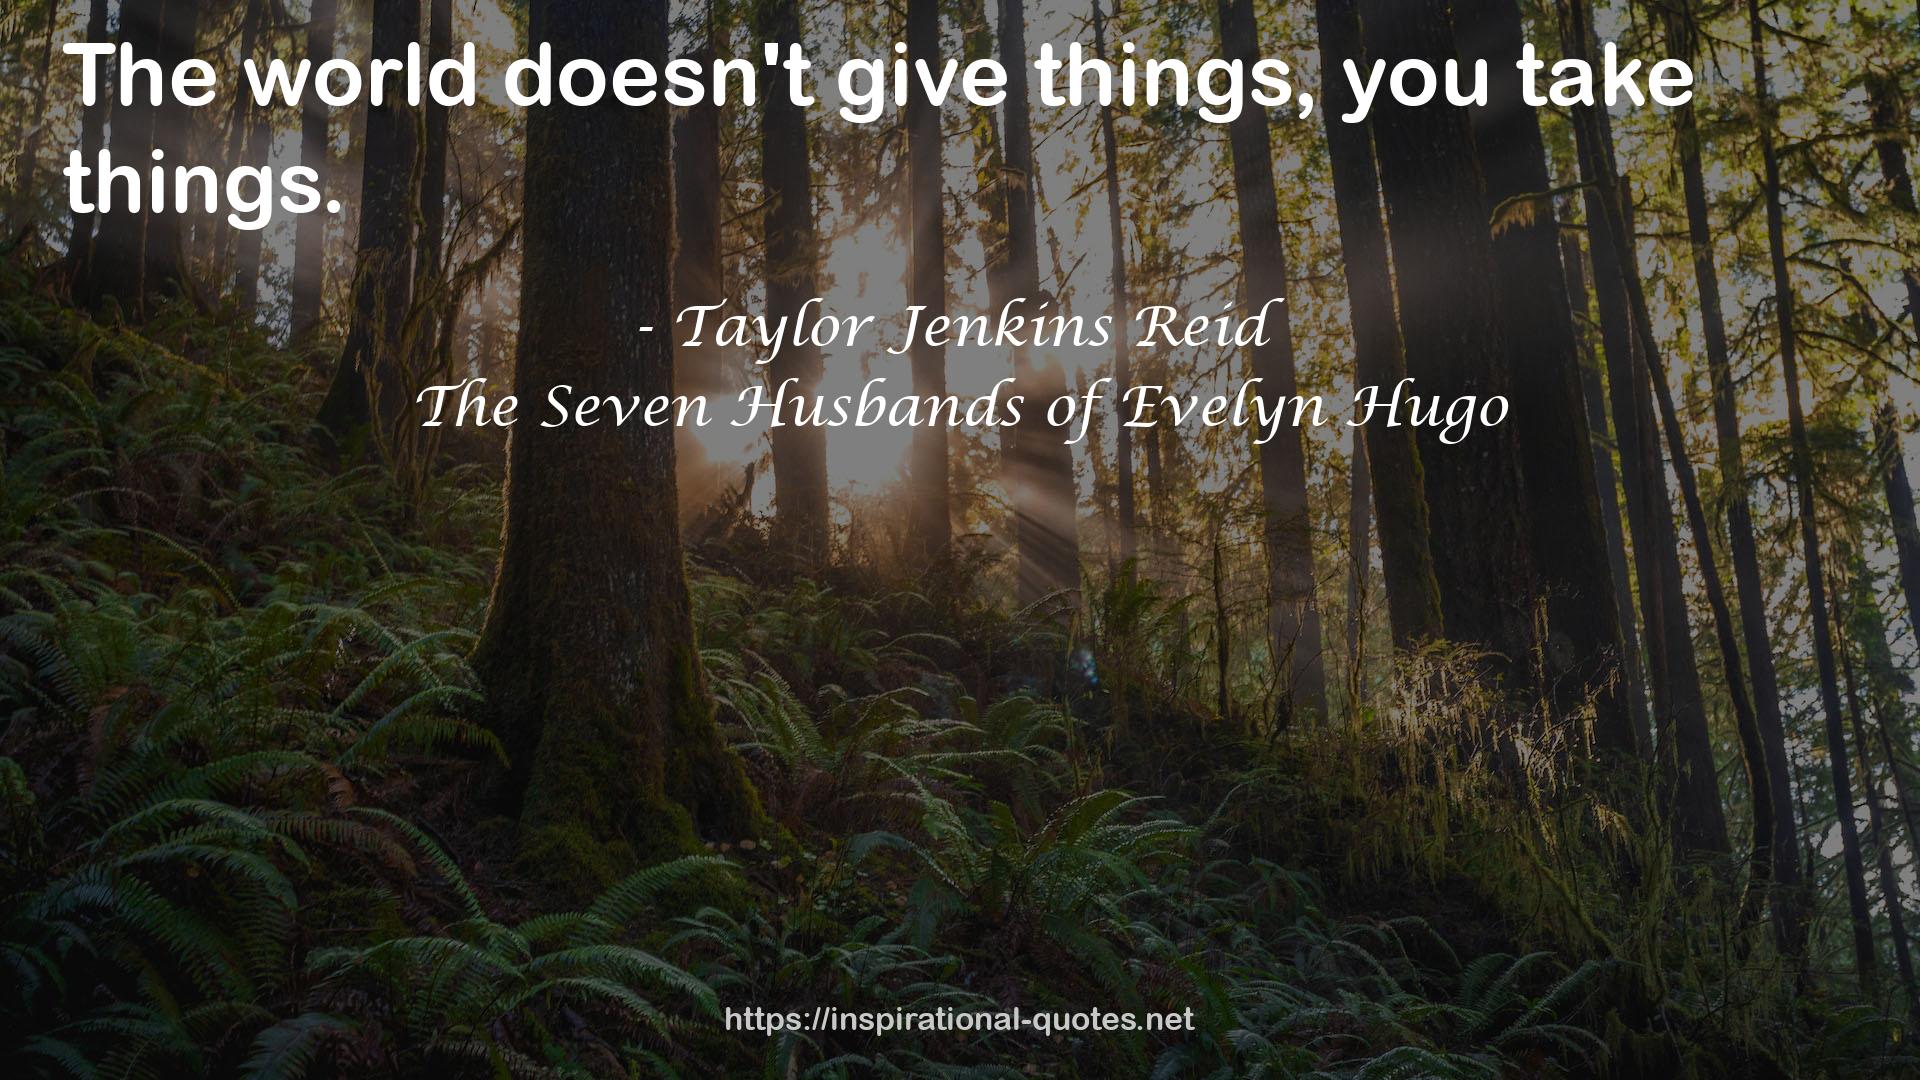 The Seven Husbands of Evelyn Hugo QUOTES